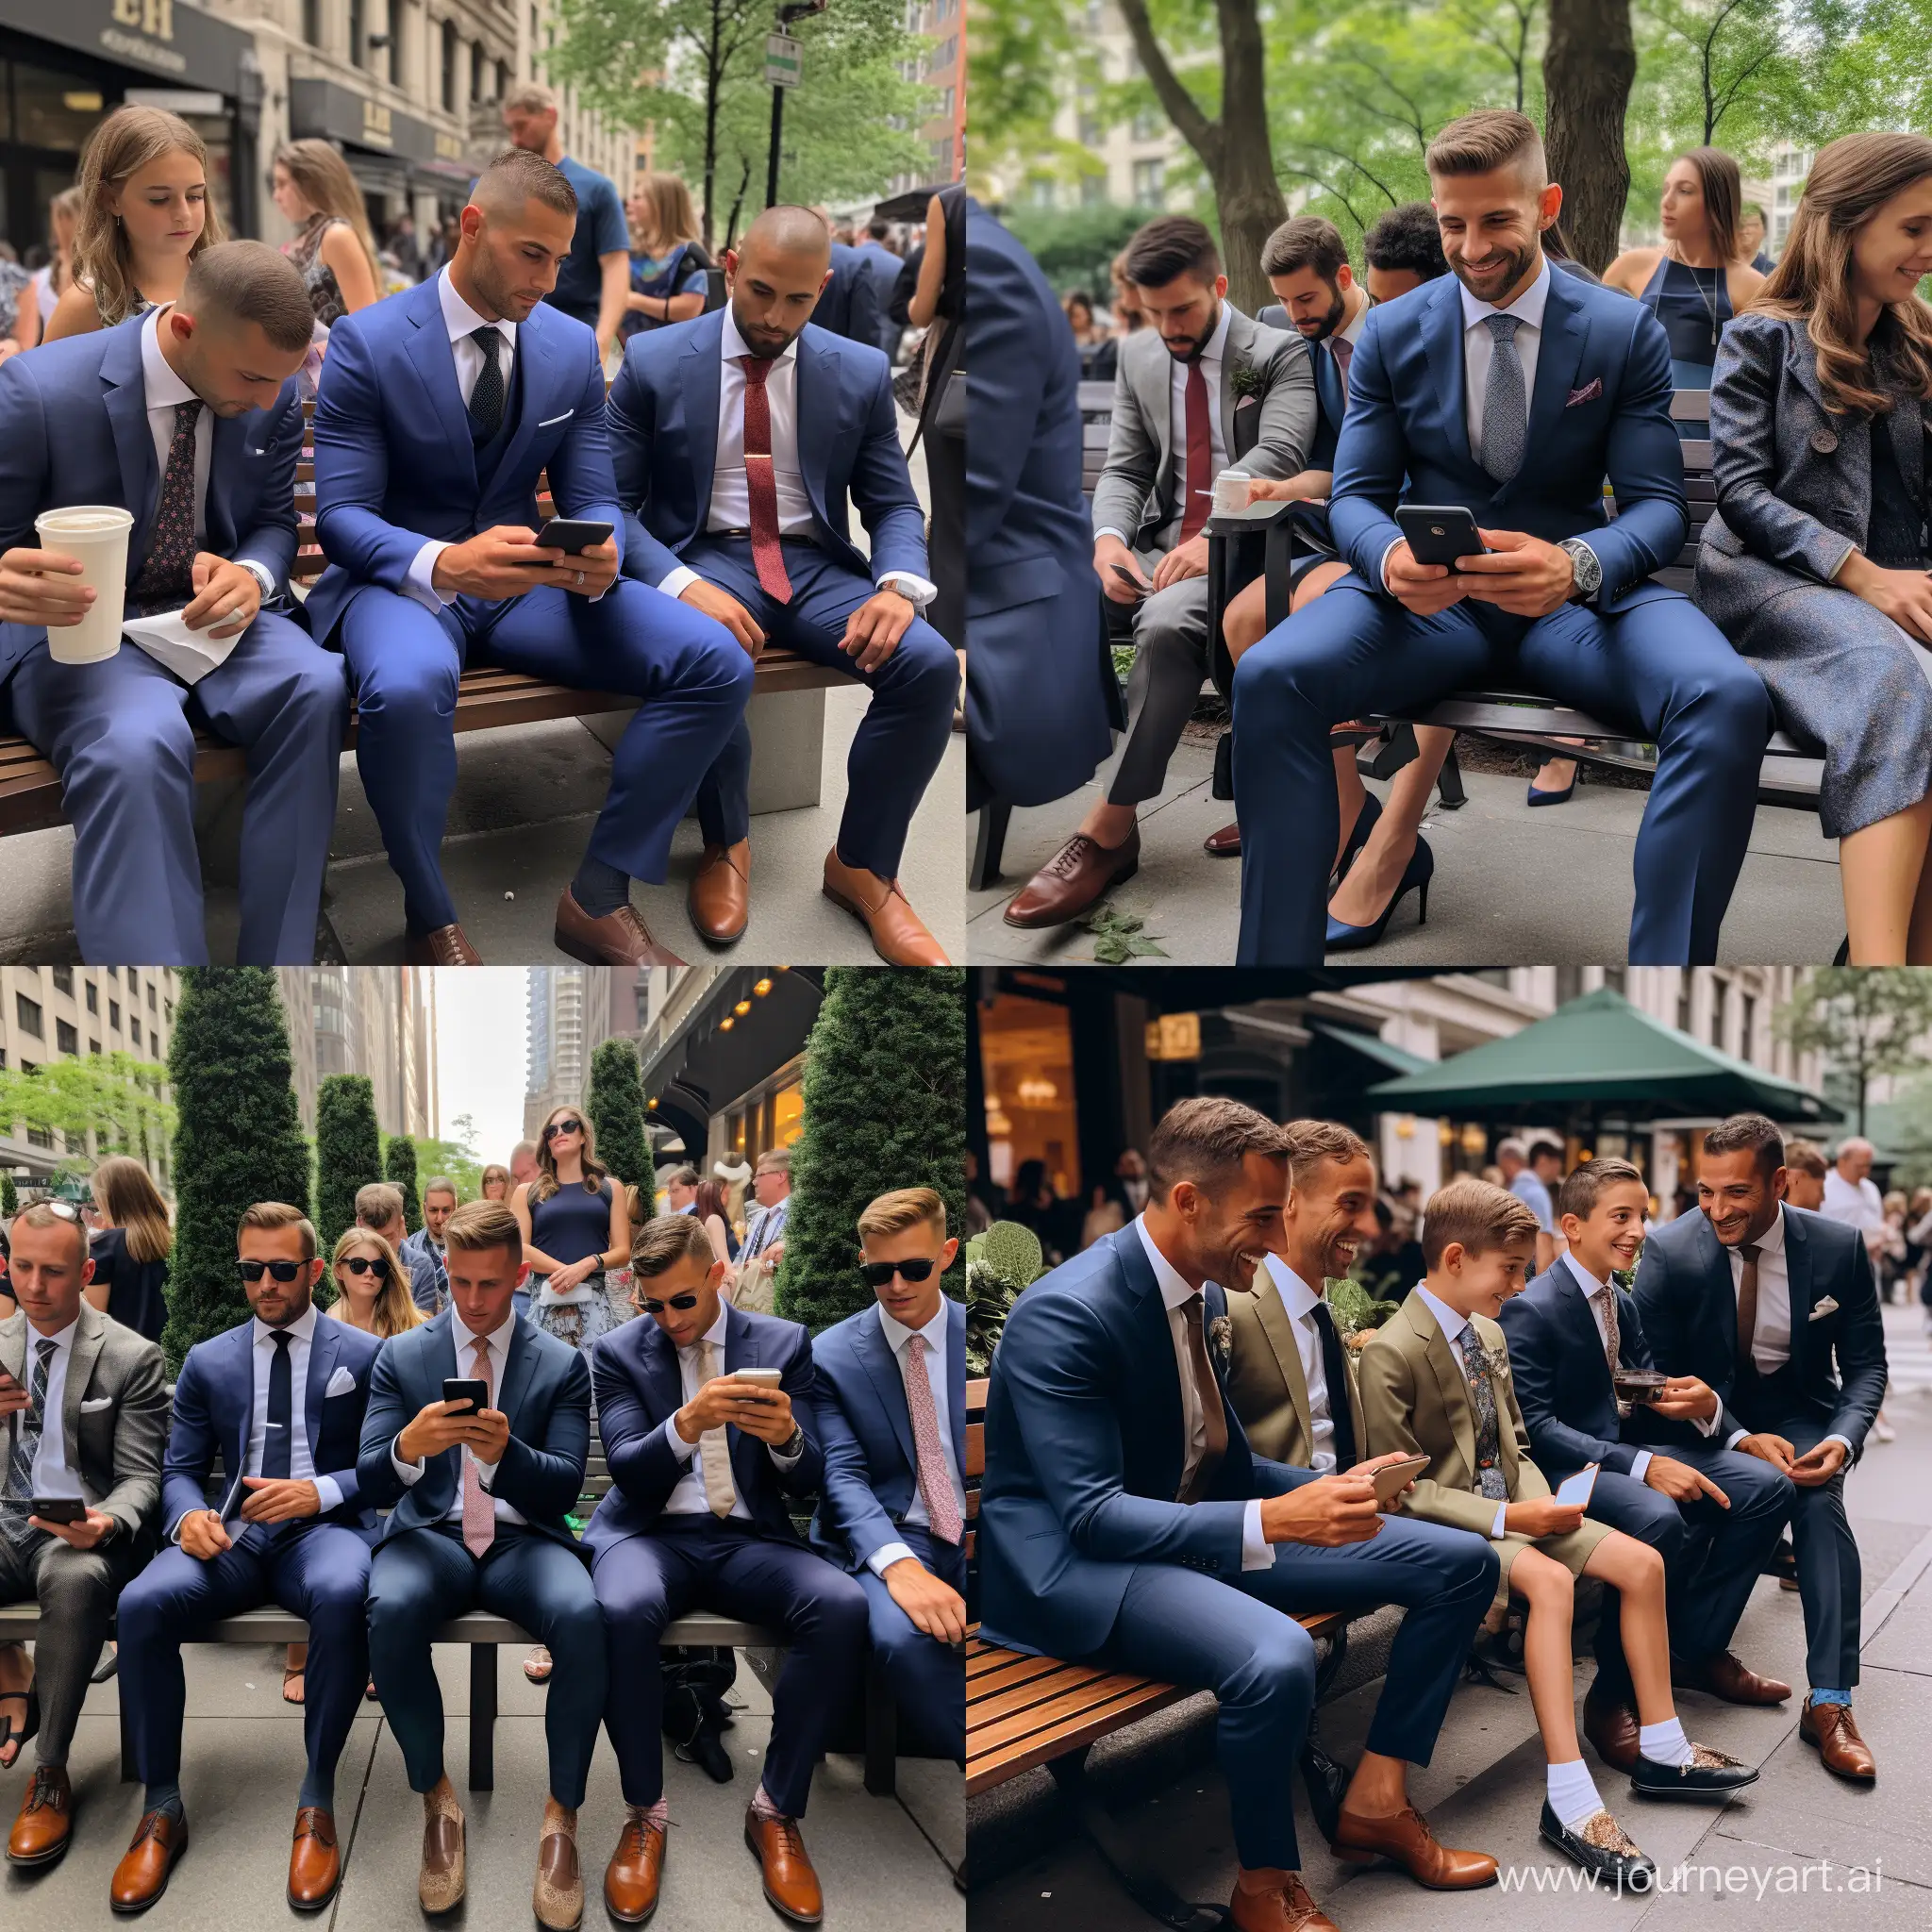 Joyful-Family-Gathering-at-New-York-Wedding-Candid-Moment-on-a-Park-Bench